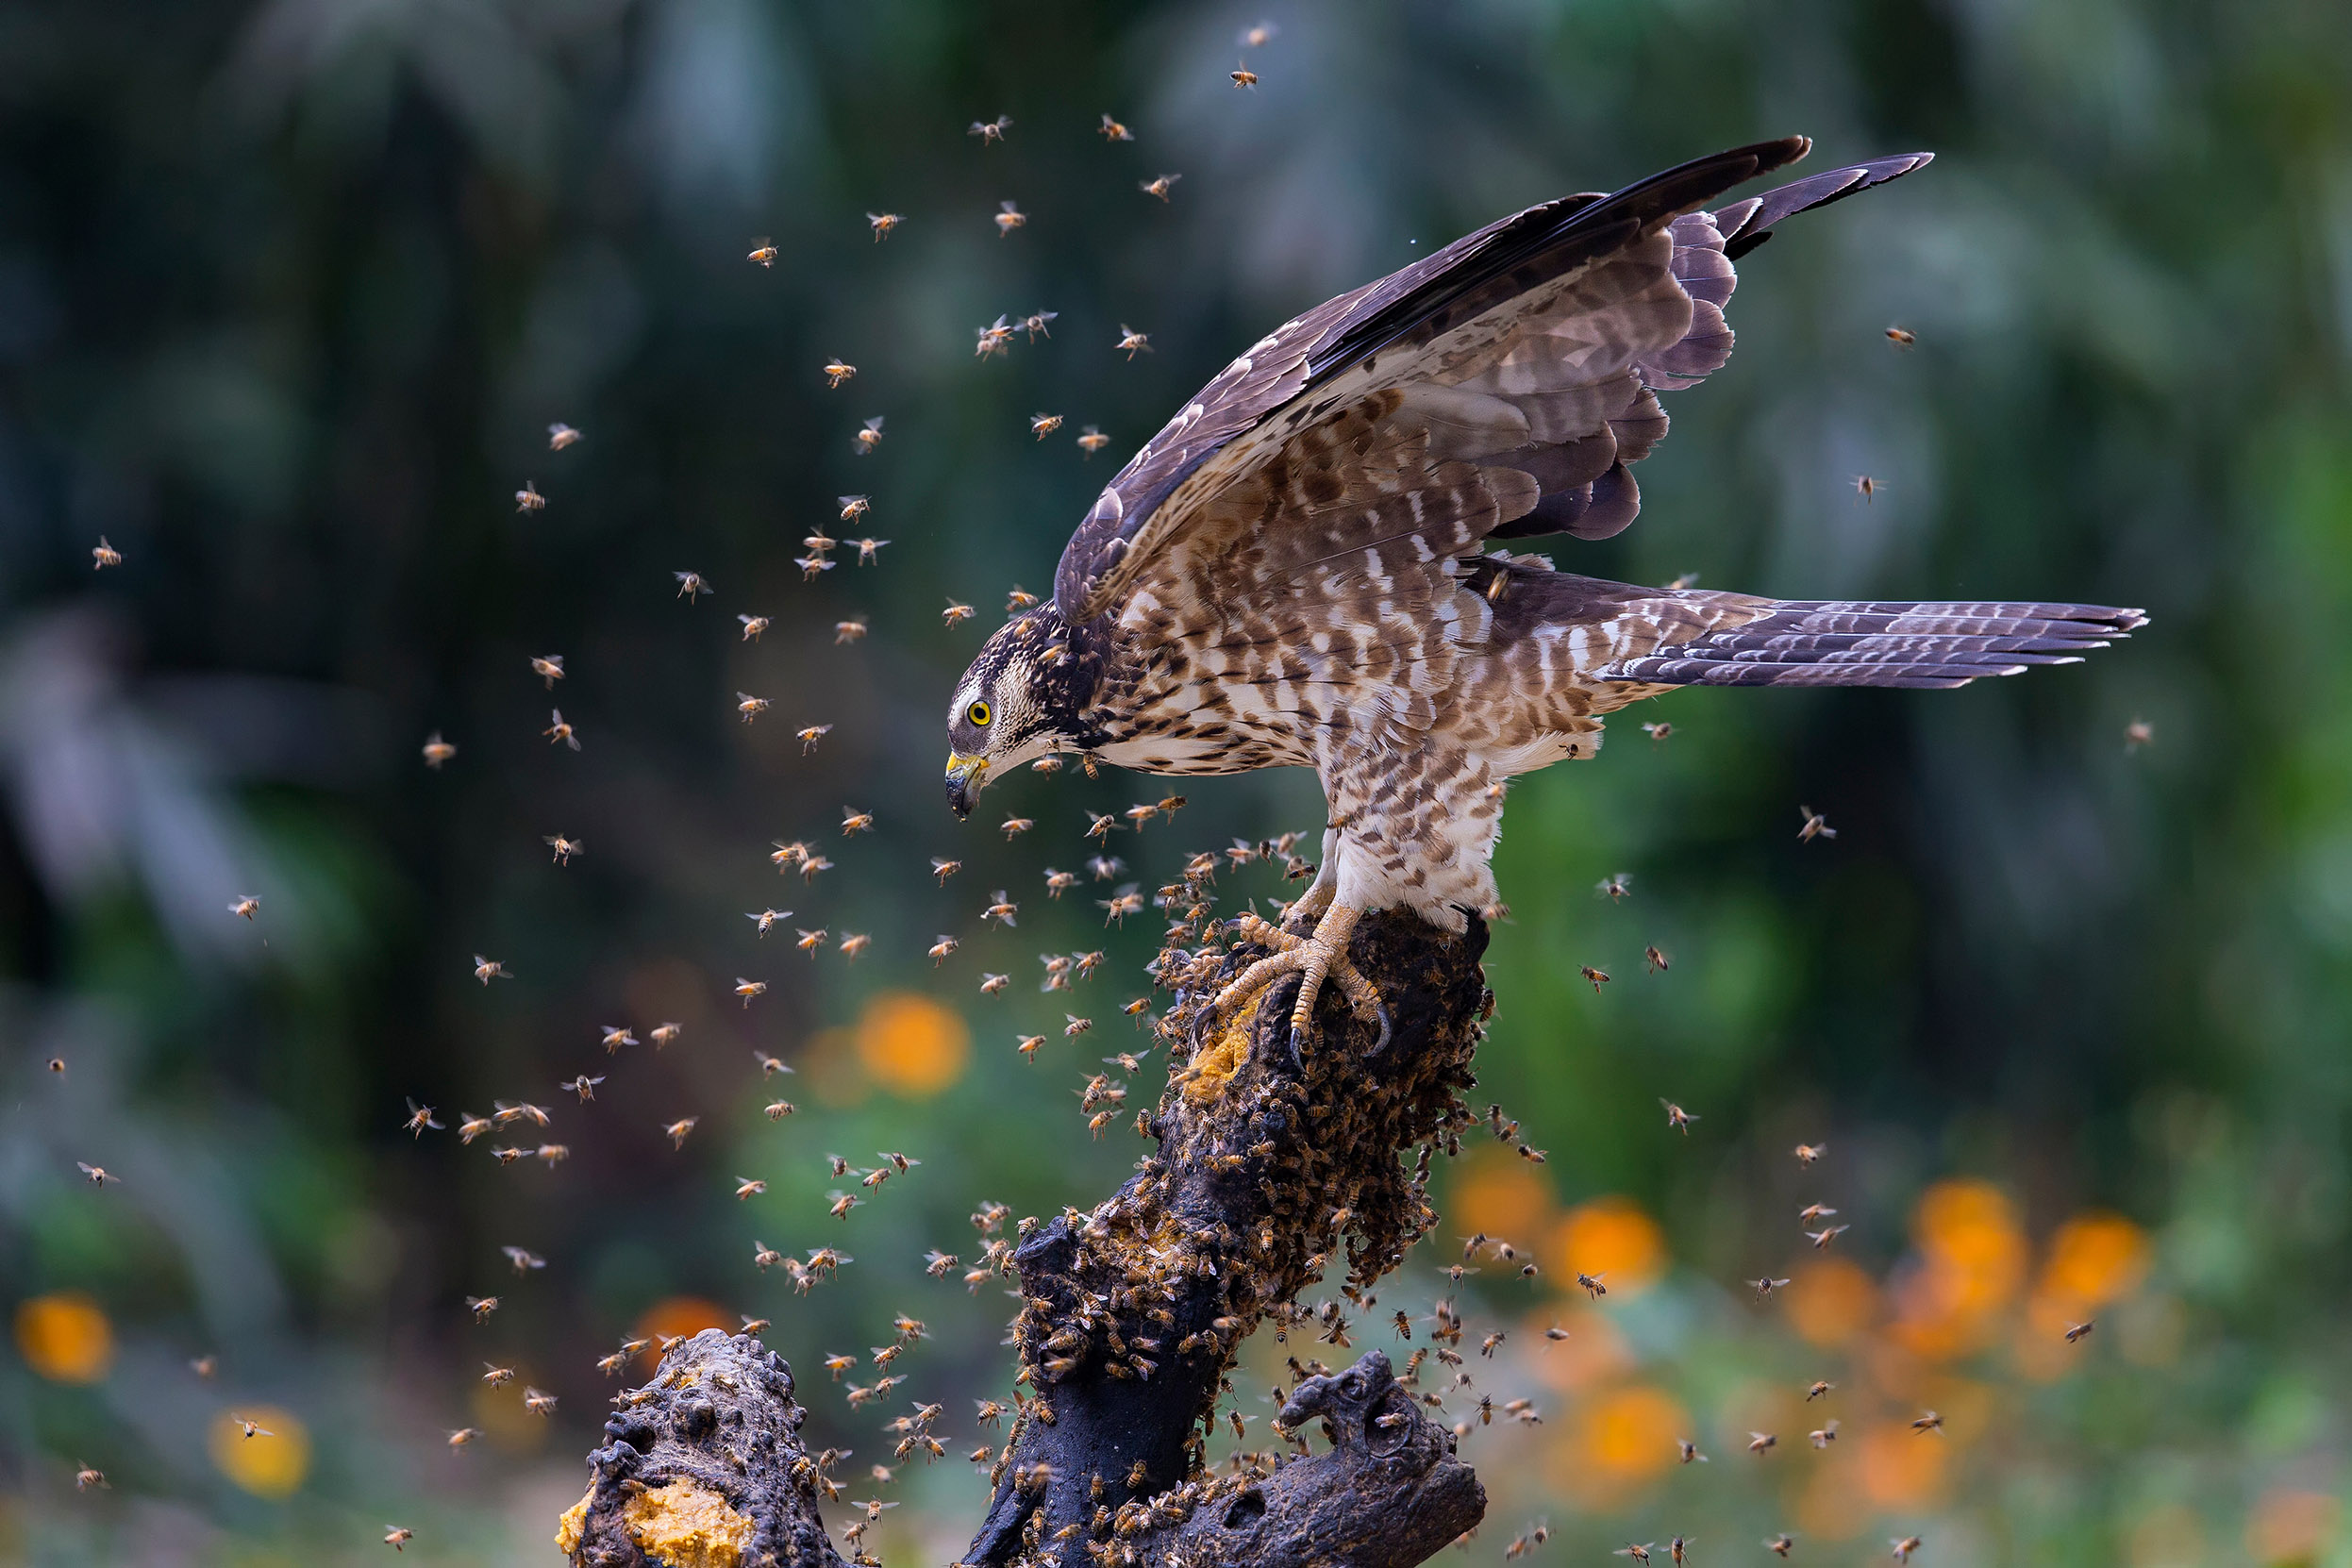 A Honey Buzzard perched on a branch surrounded by a swarm of bees.